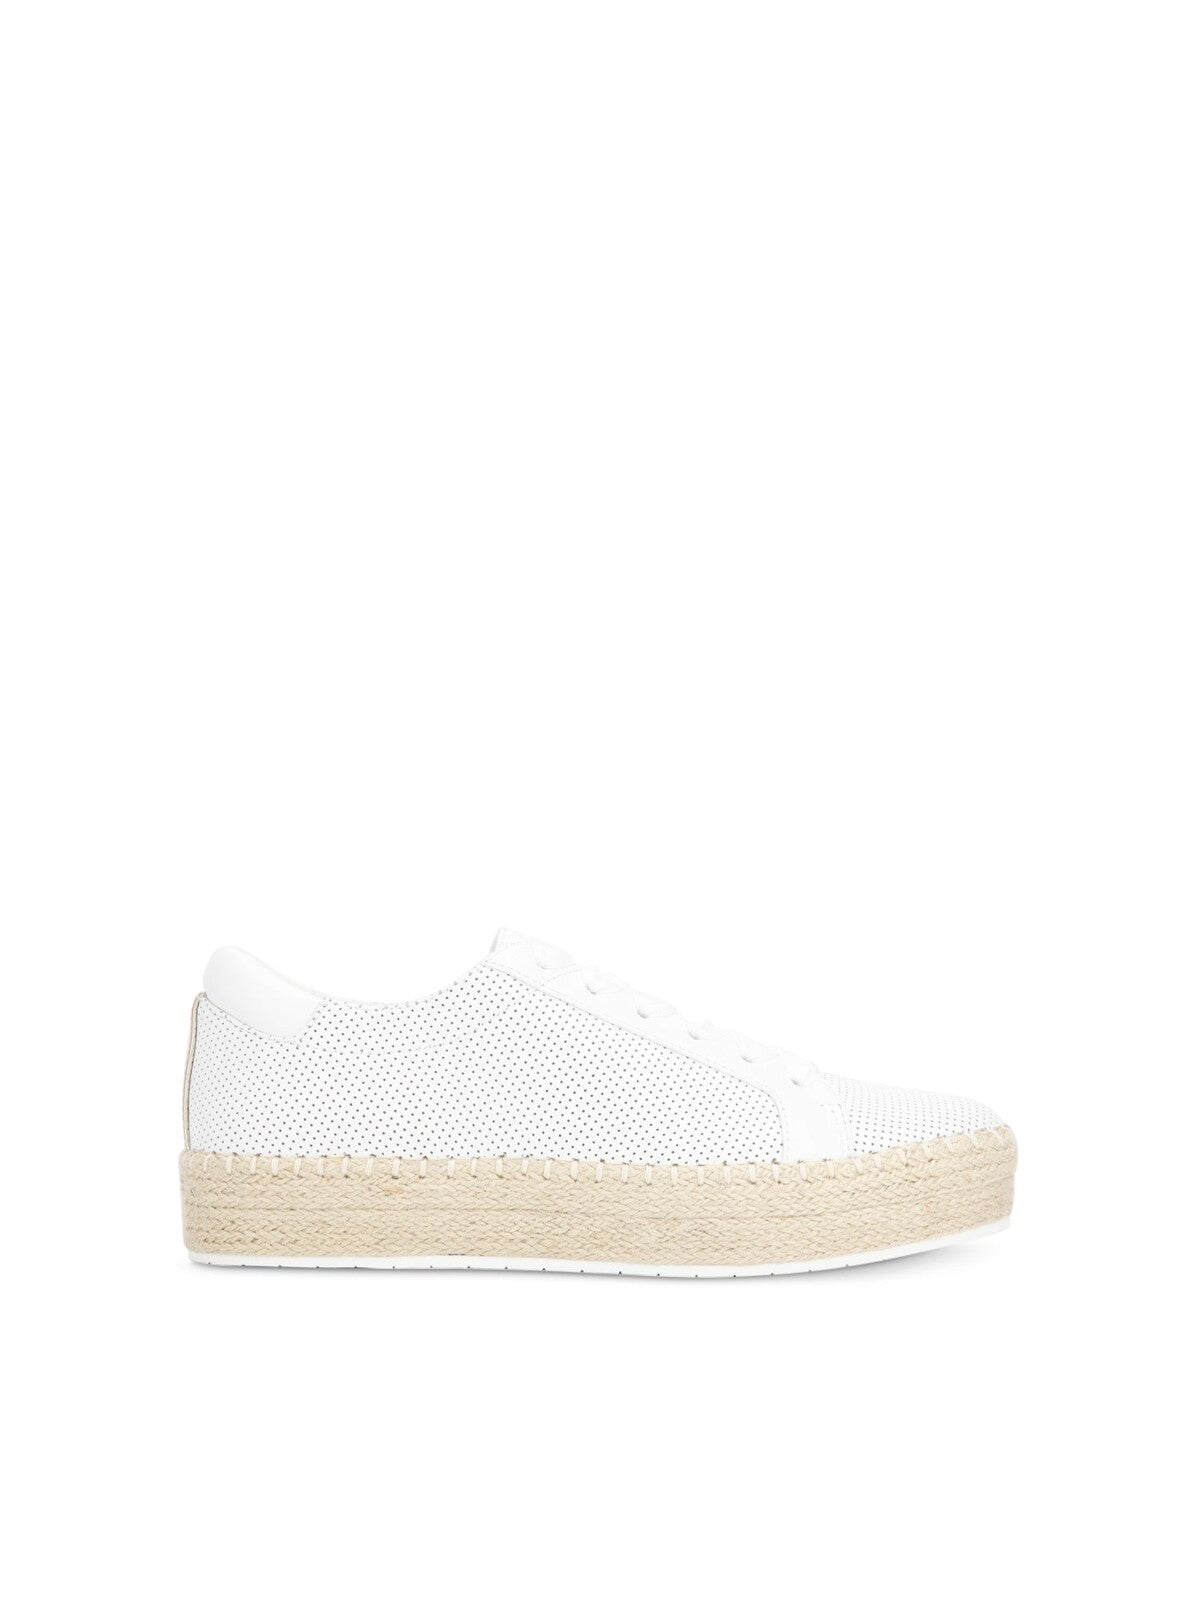 KENNETH COLE NEW YORK Womens White Espadrille Wrap Perforated Cushioned Kamspadrille Round Toe Platform Lace-Up Leather Athletic Sneakers Shoes 6.5 M